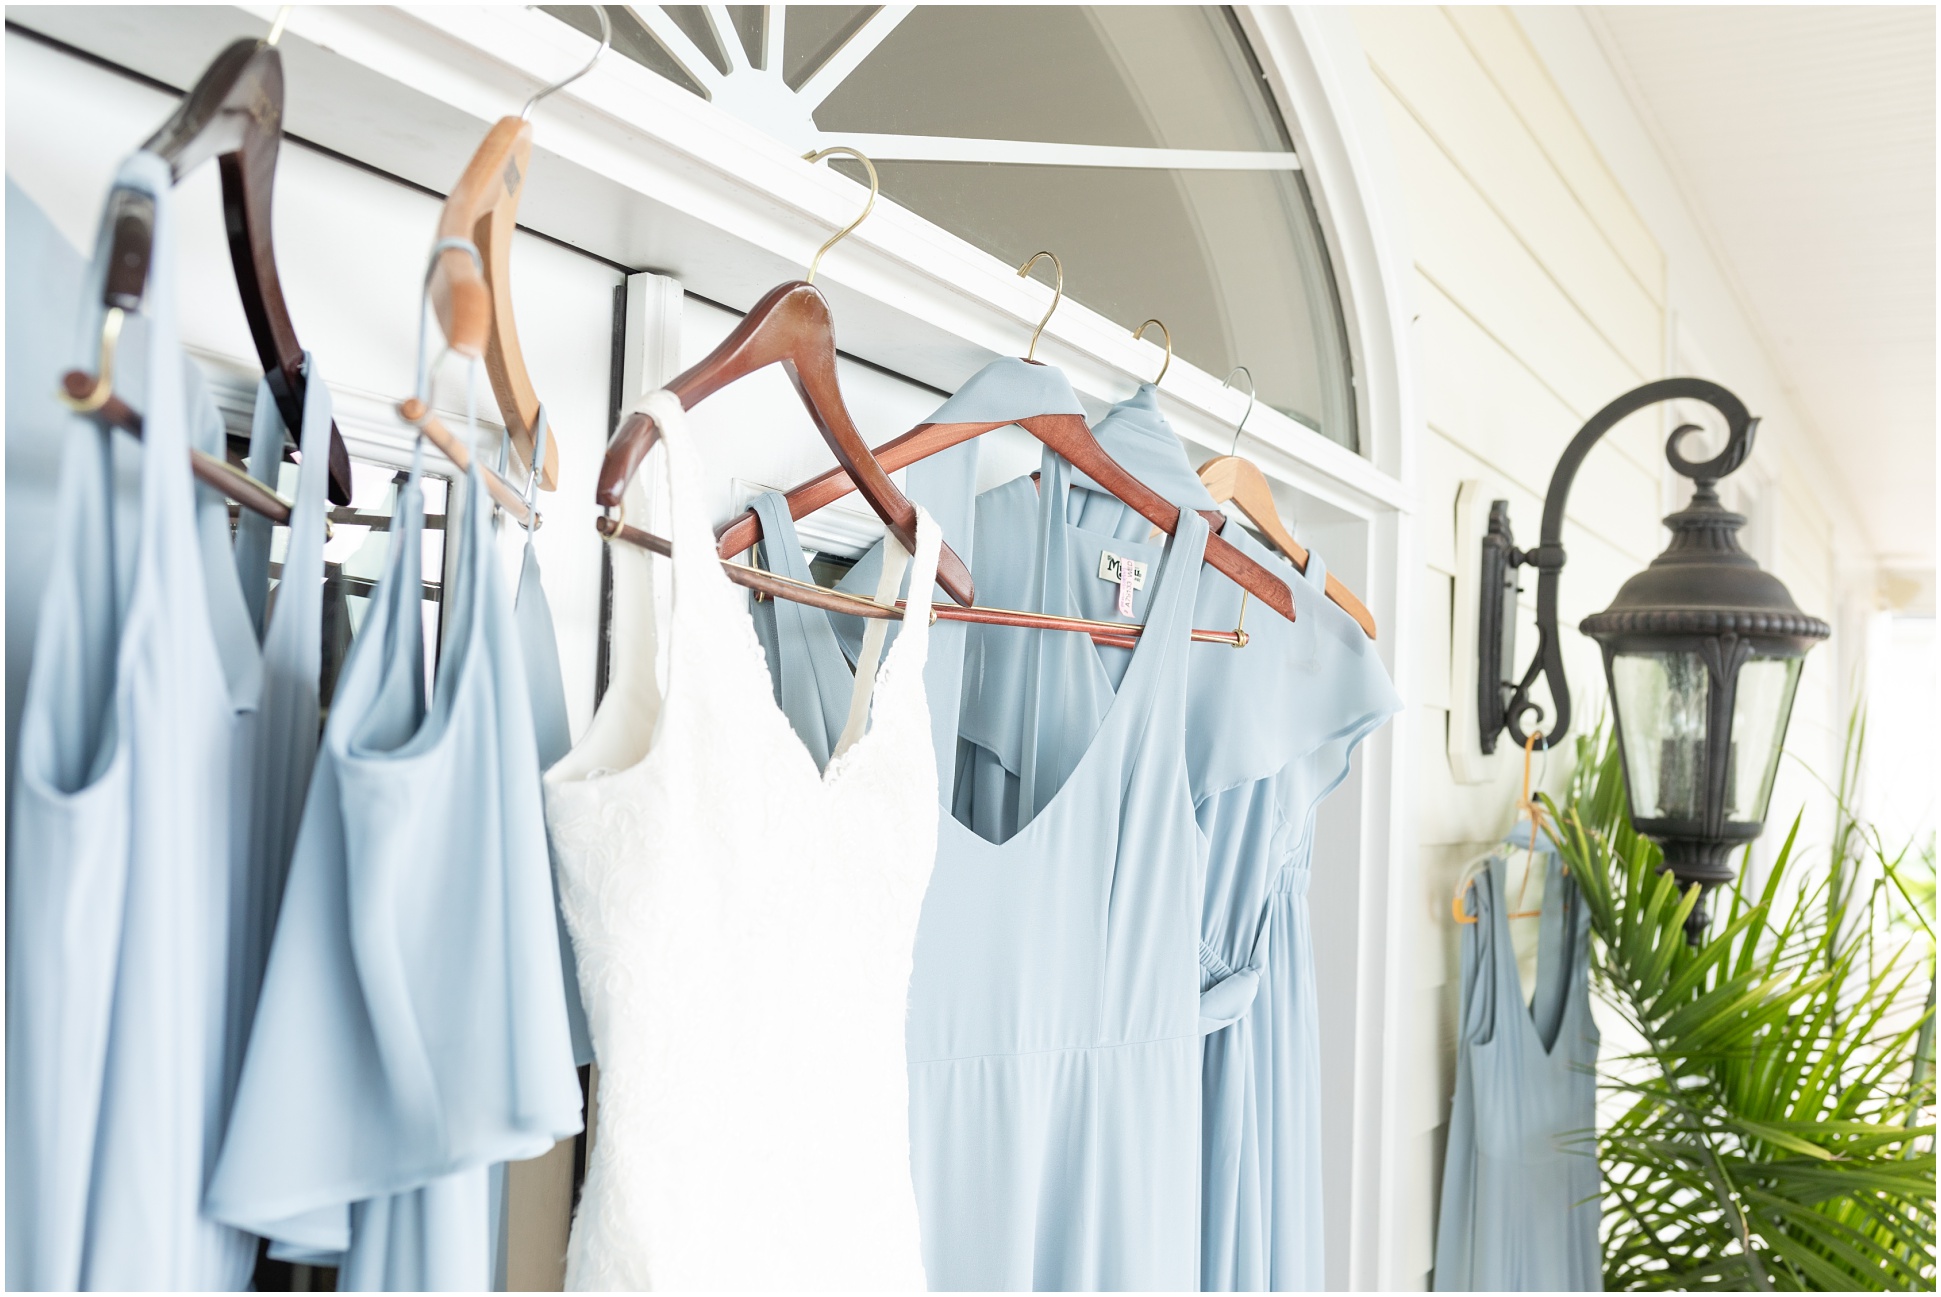 Blue Love your MuMu bridesmaids dresses hanging up next to Bridal gown